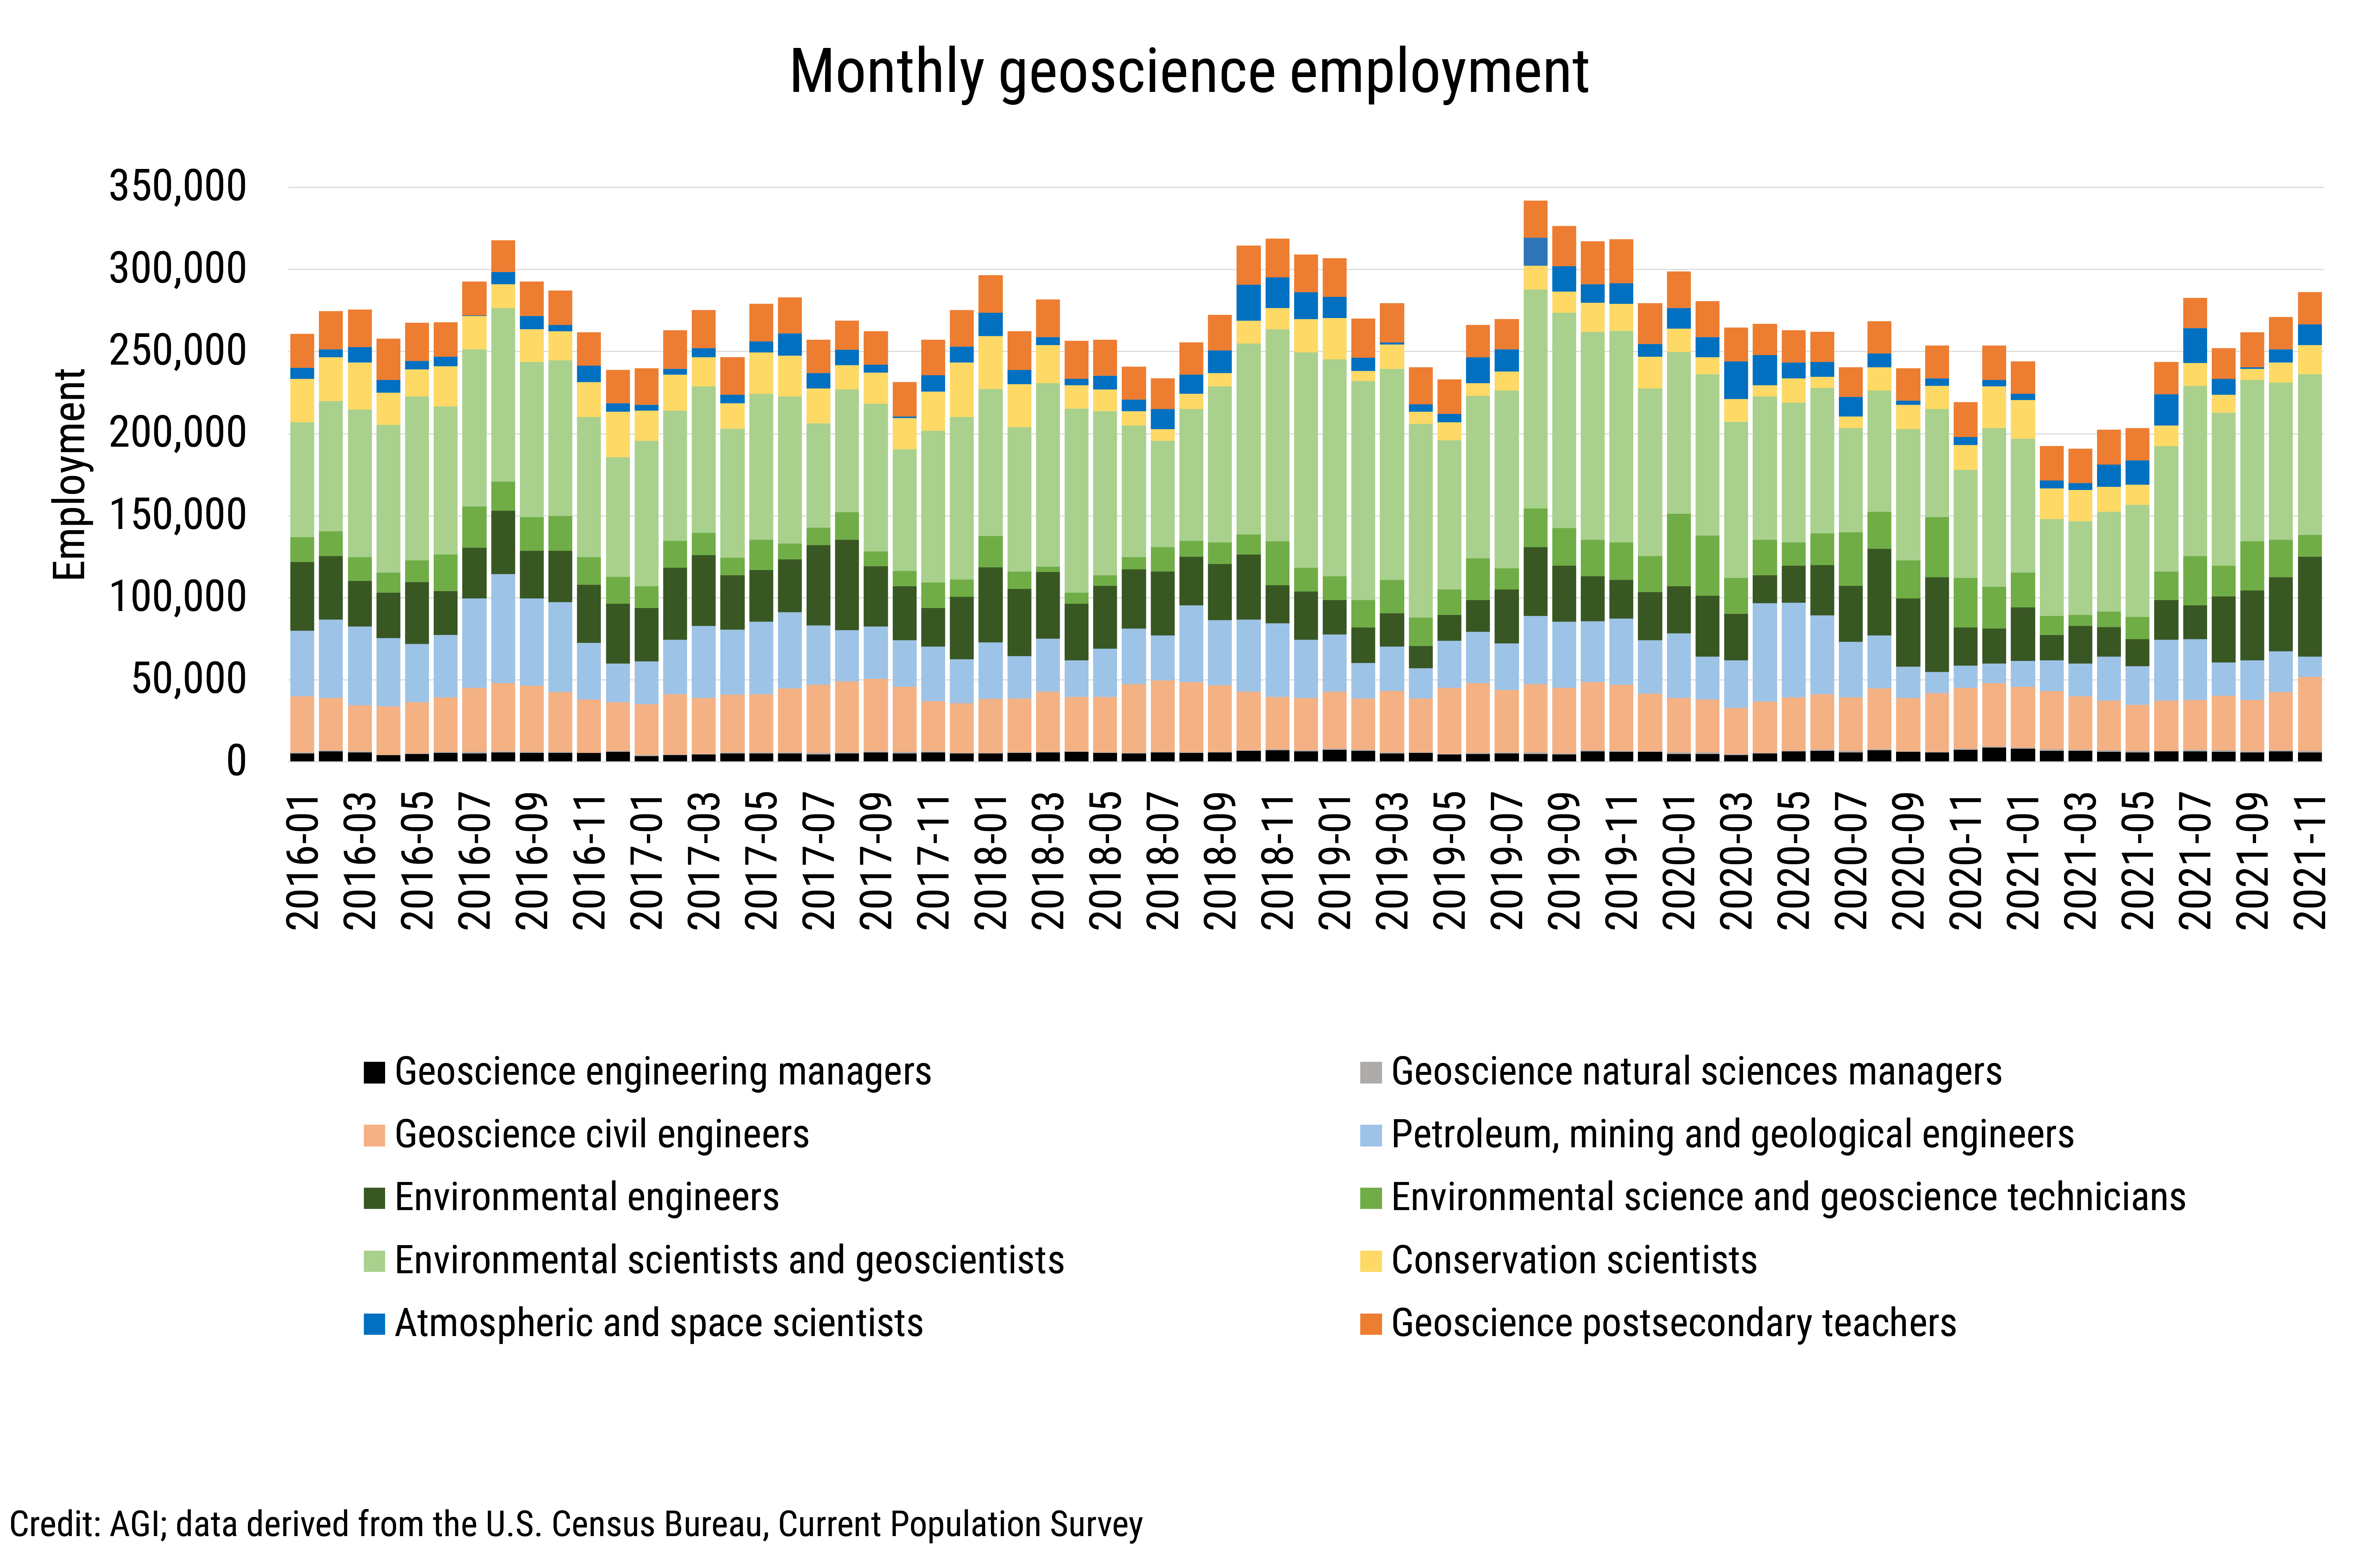 DB_2022-001 chart 01: Monthly geoscience employment (Credit: AGI; data derived from the U.S. Census Bureau, Current Population Survey)